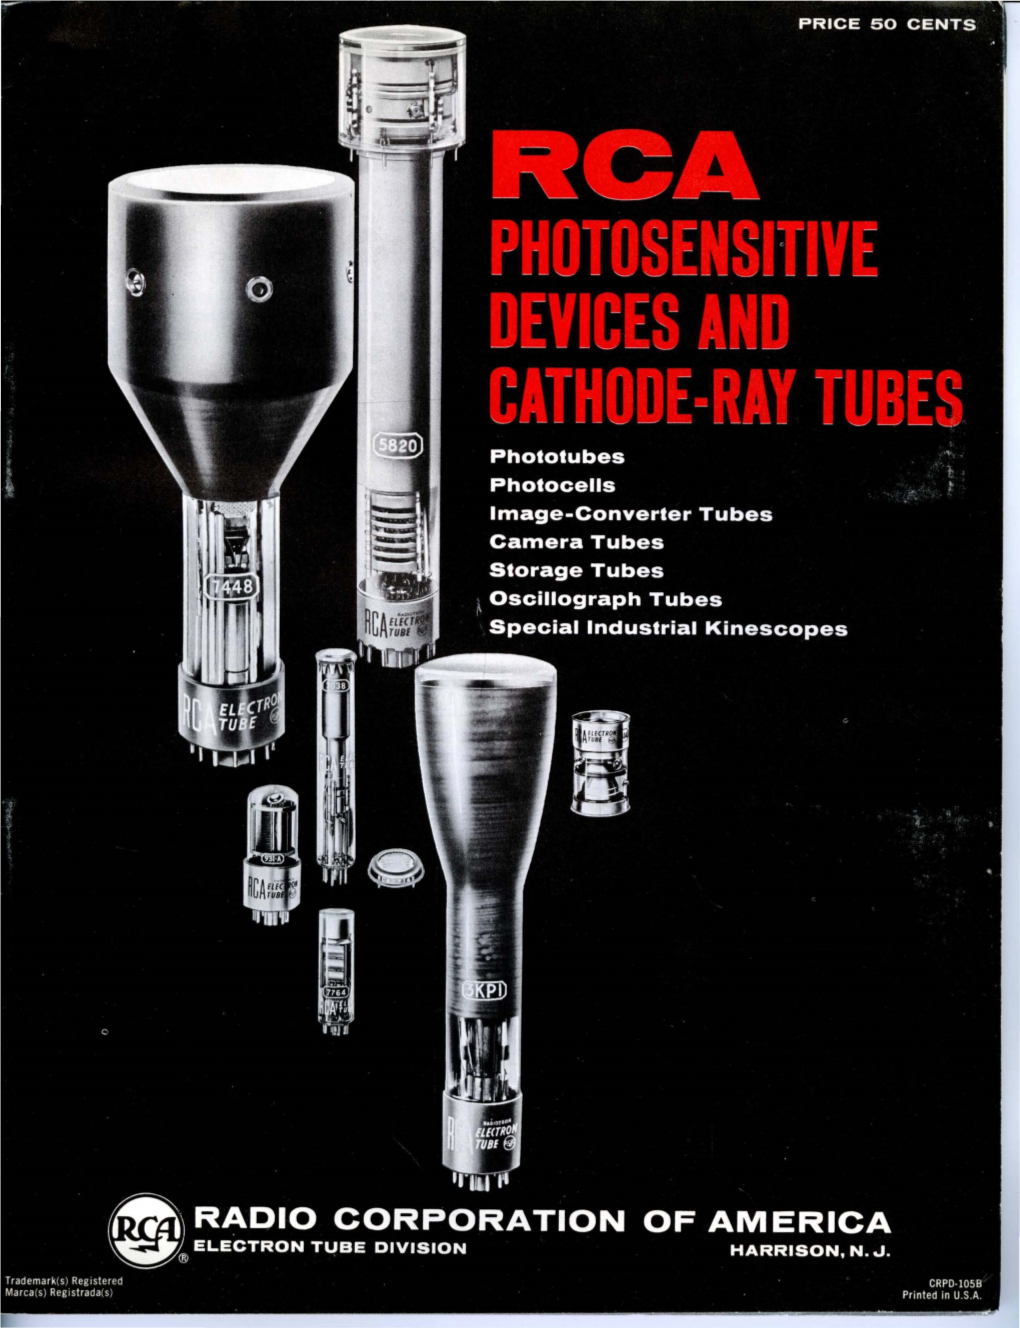 RCA Photosensitive Devices and Cathode-Ray Tubes